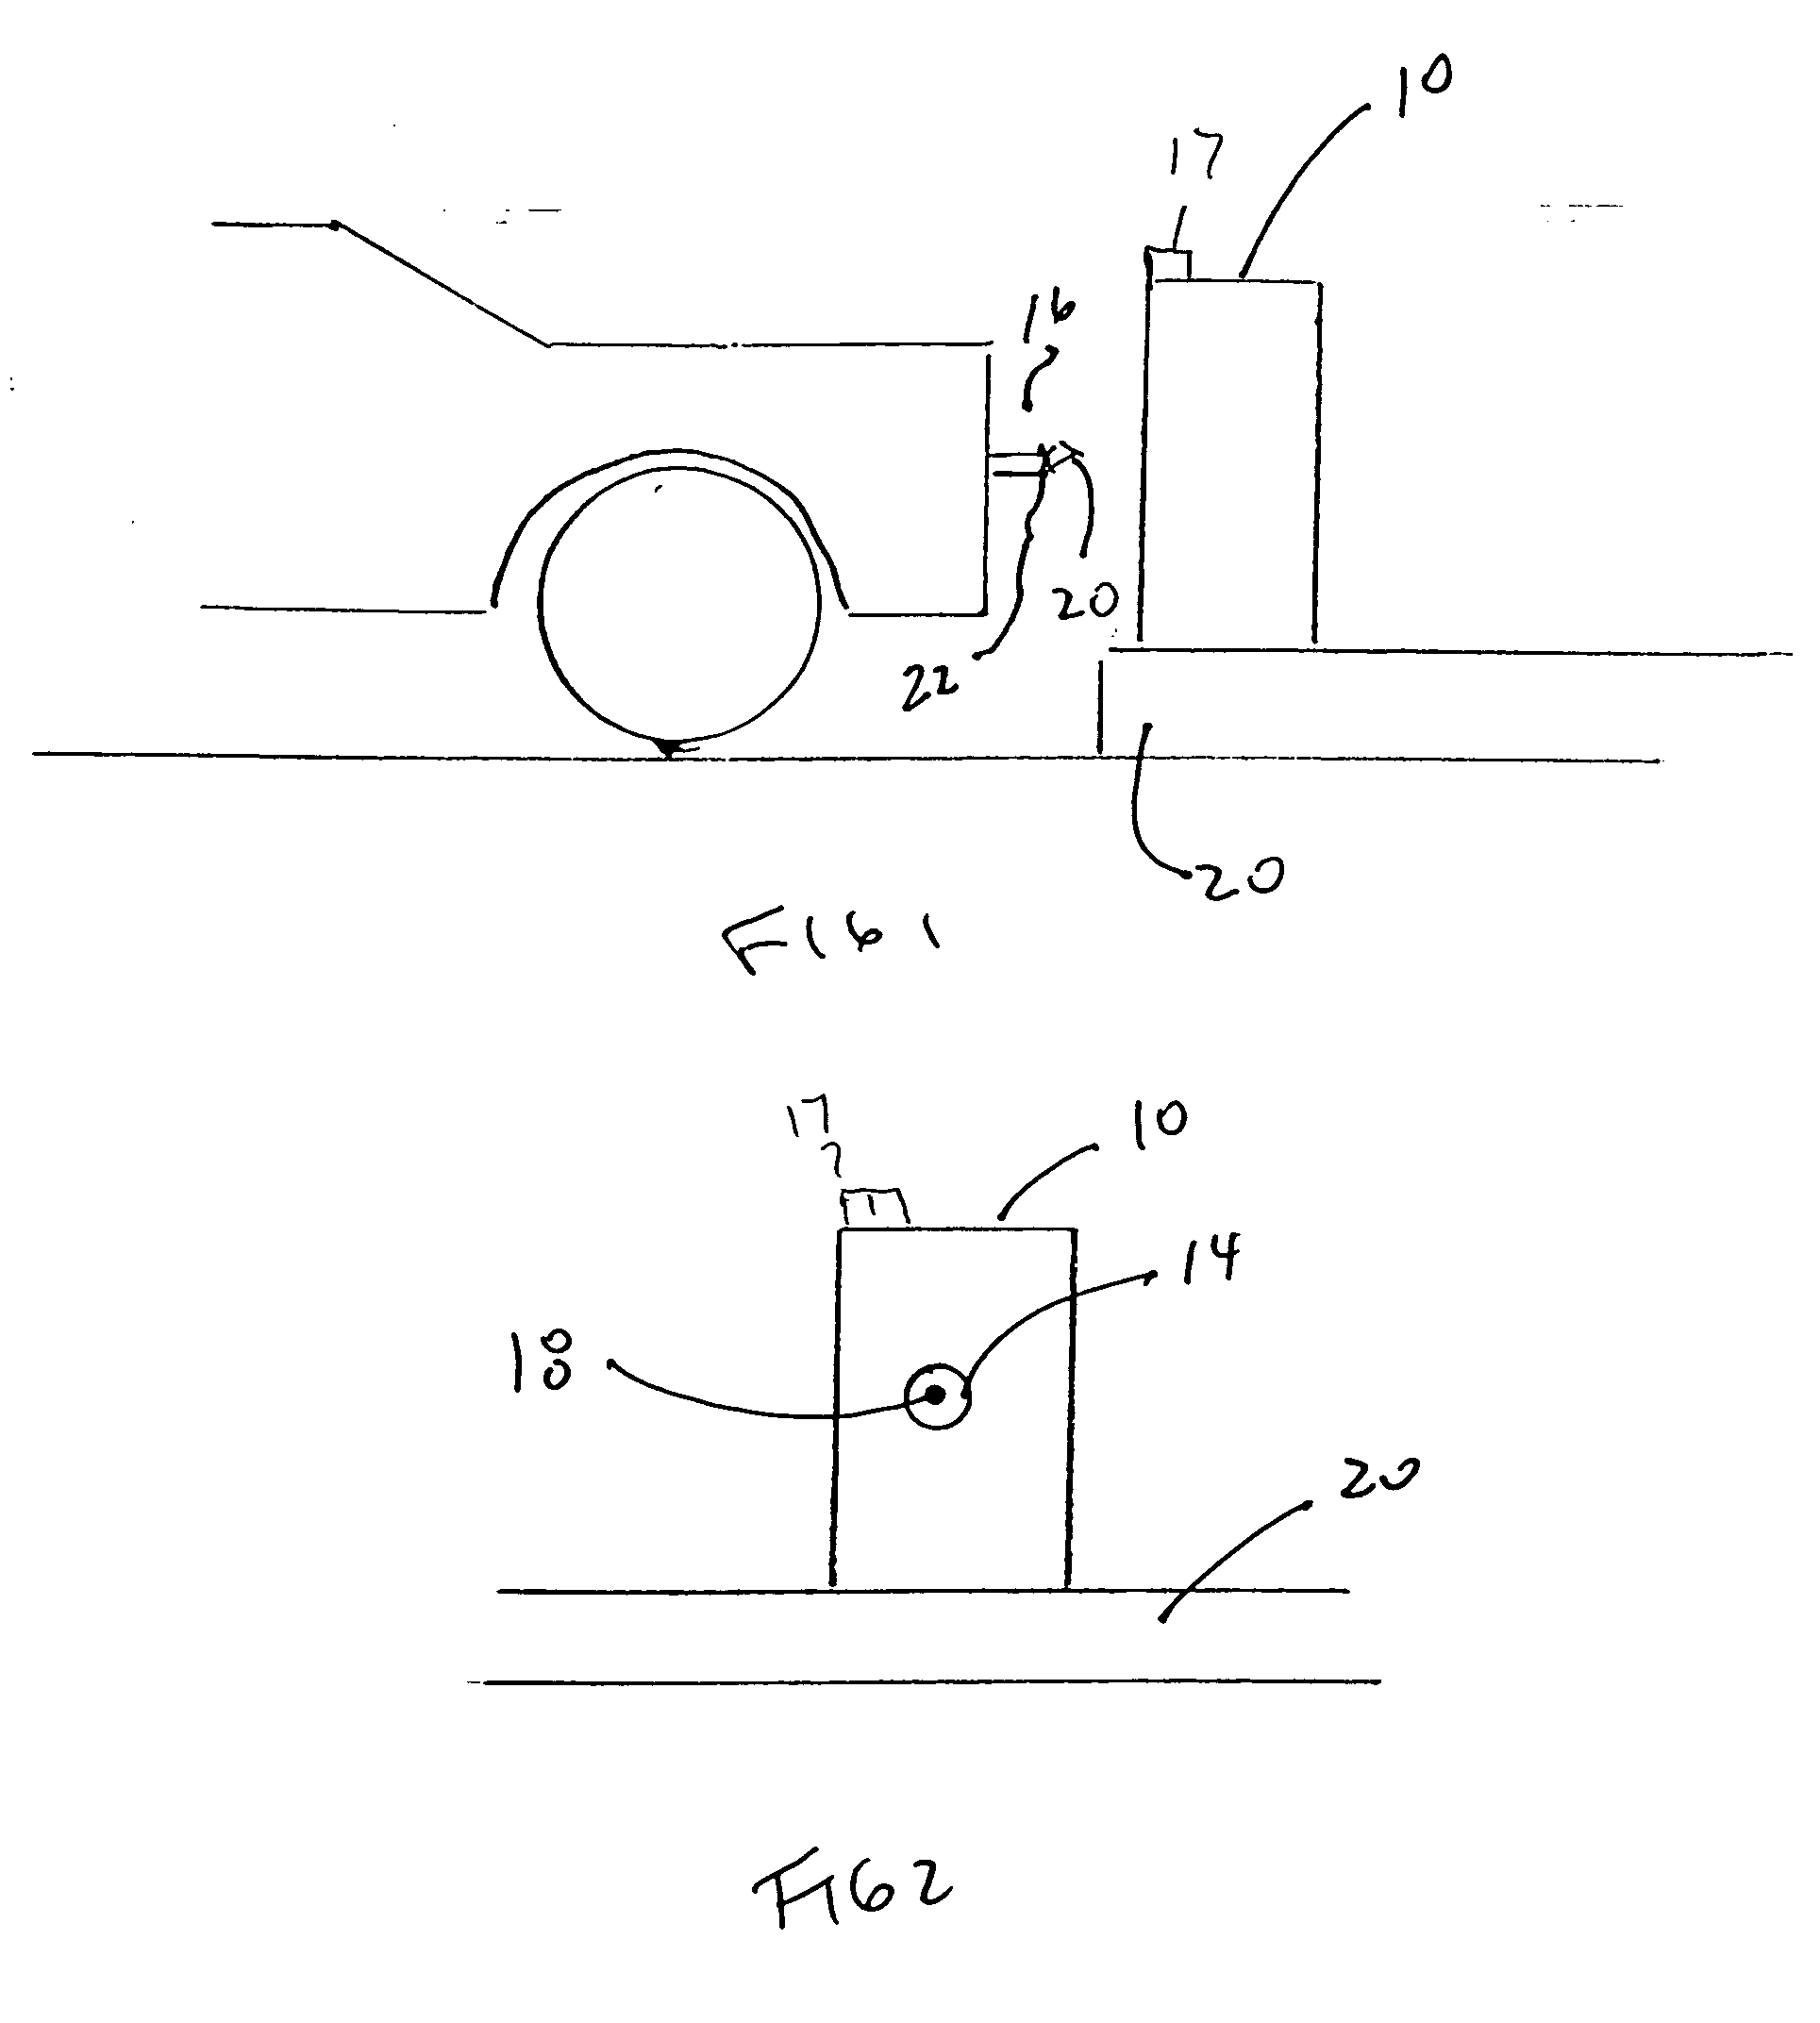 Automatic recharging docking station for electric vehicles and hybrid vehicles